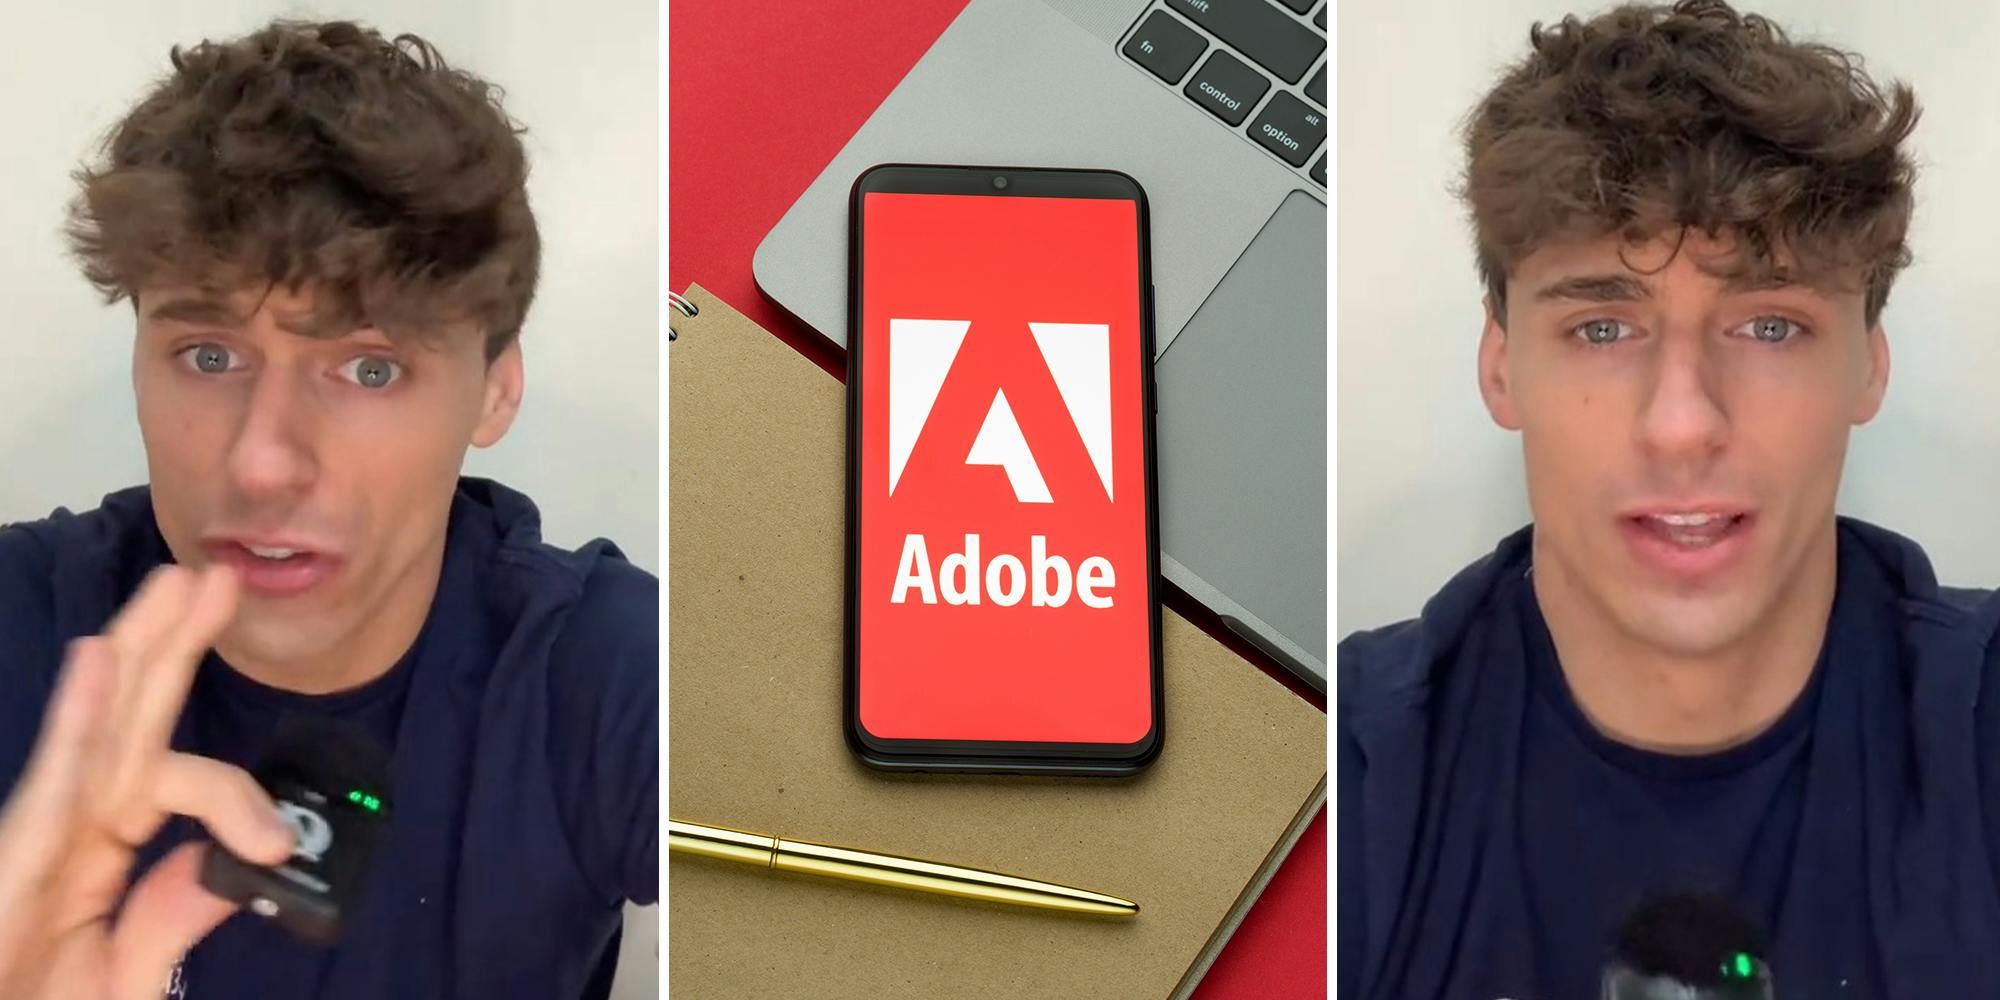 Creator says Adobe tricked customers into giving them permission to use their content